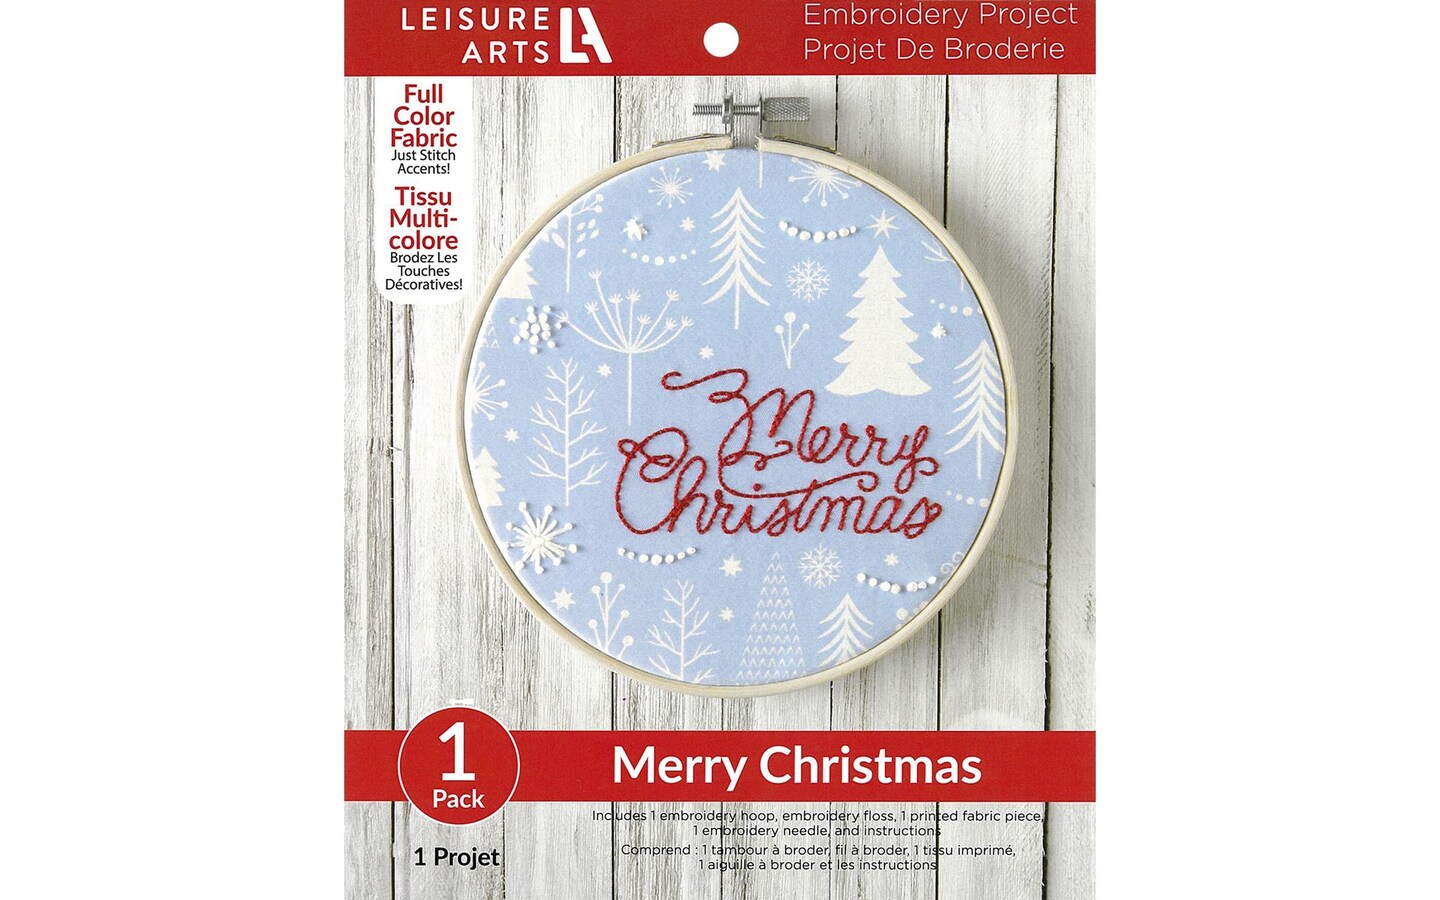 Photo embroidery kit for beginners - Christmas colors